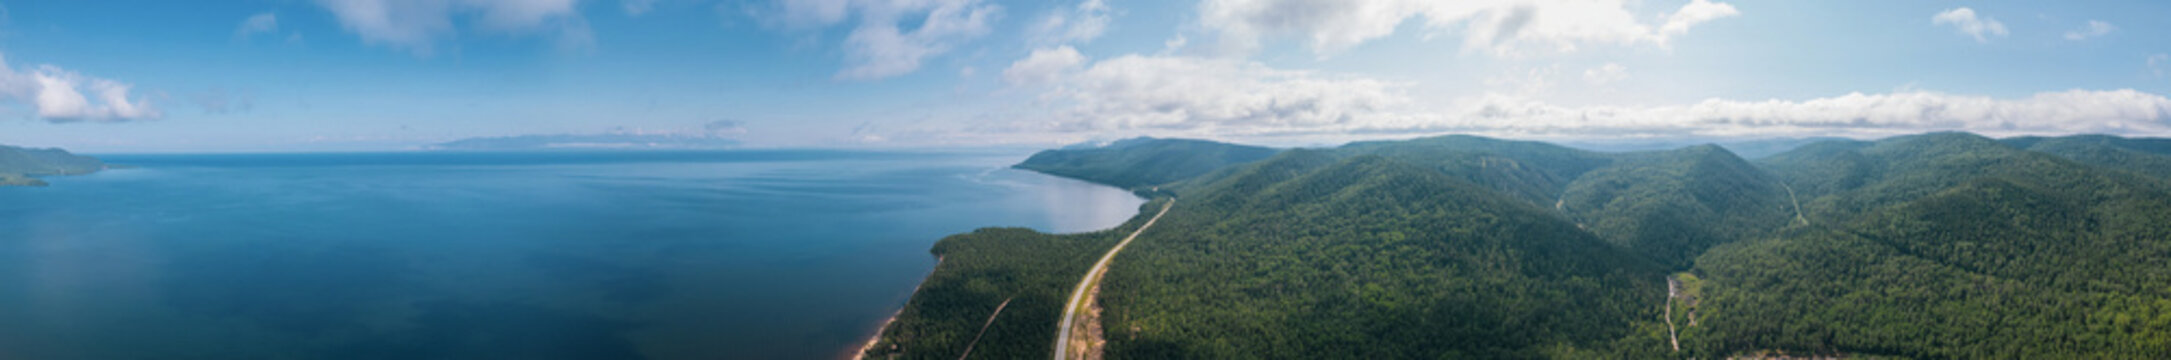 Summertime imagery of Lake Baikal in morning is a rift lake located in southern Siberia, Russia. Baikal lake summer landscape view. Drone's Eye View. Panoramic view.